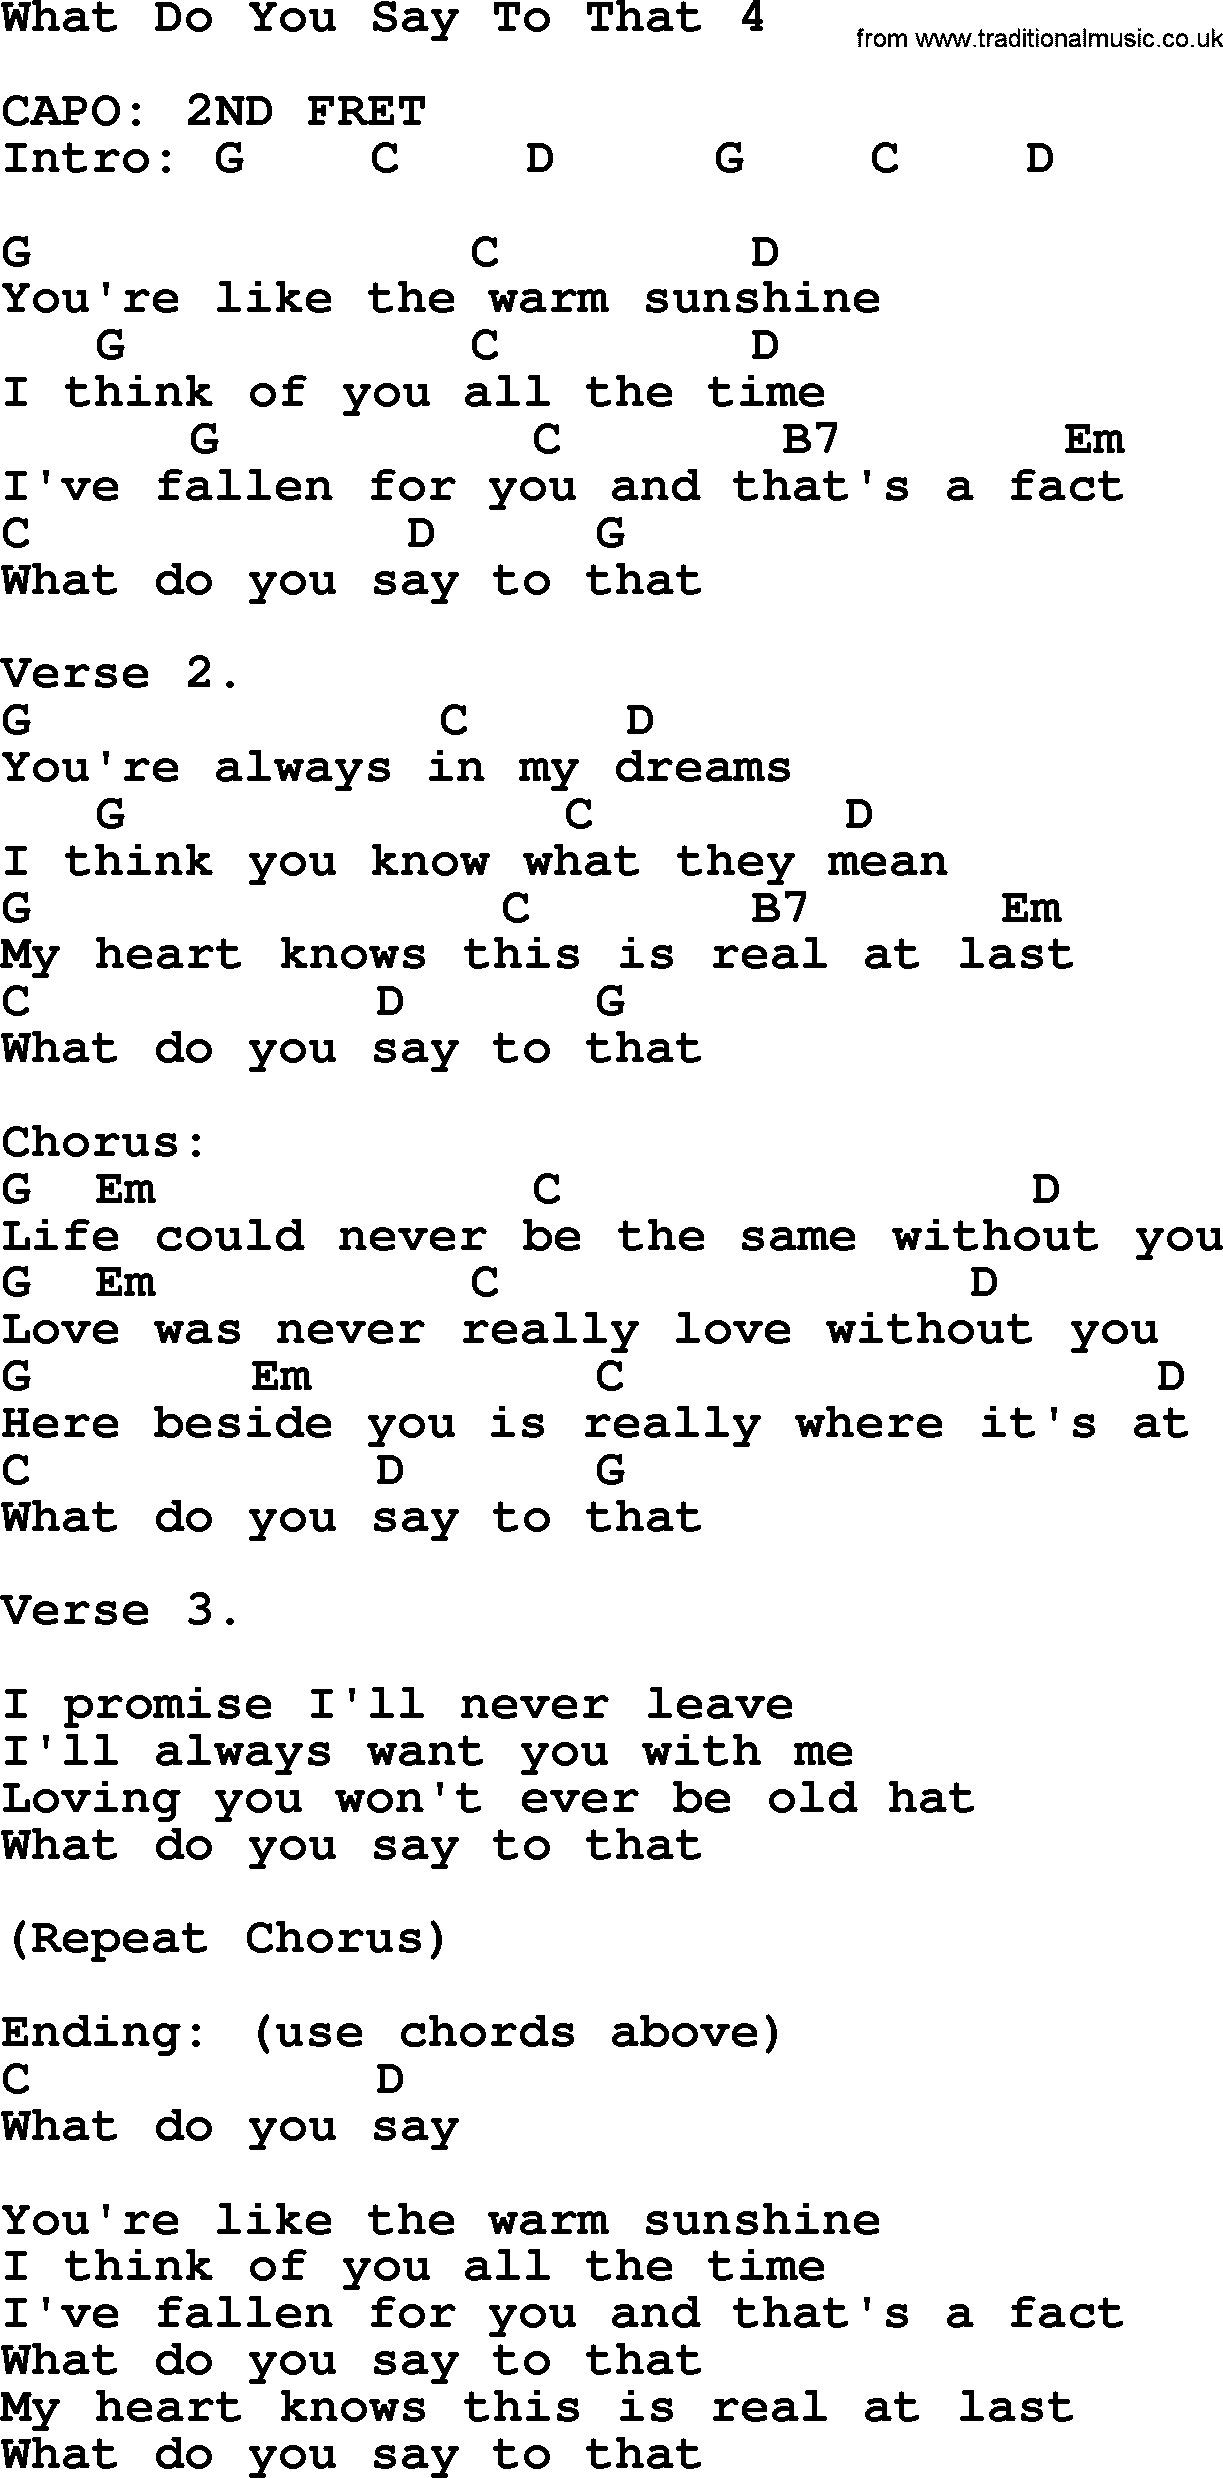 George Strait song: What Do You Say To That 4, lyrics and chords